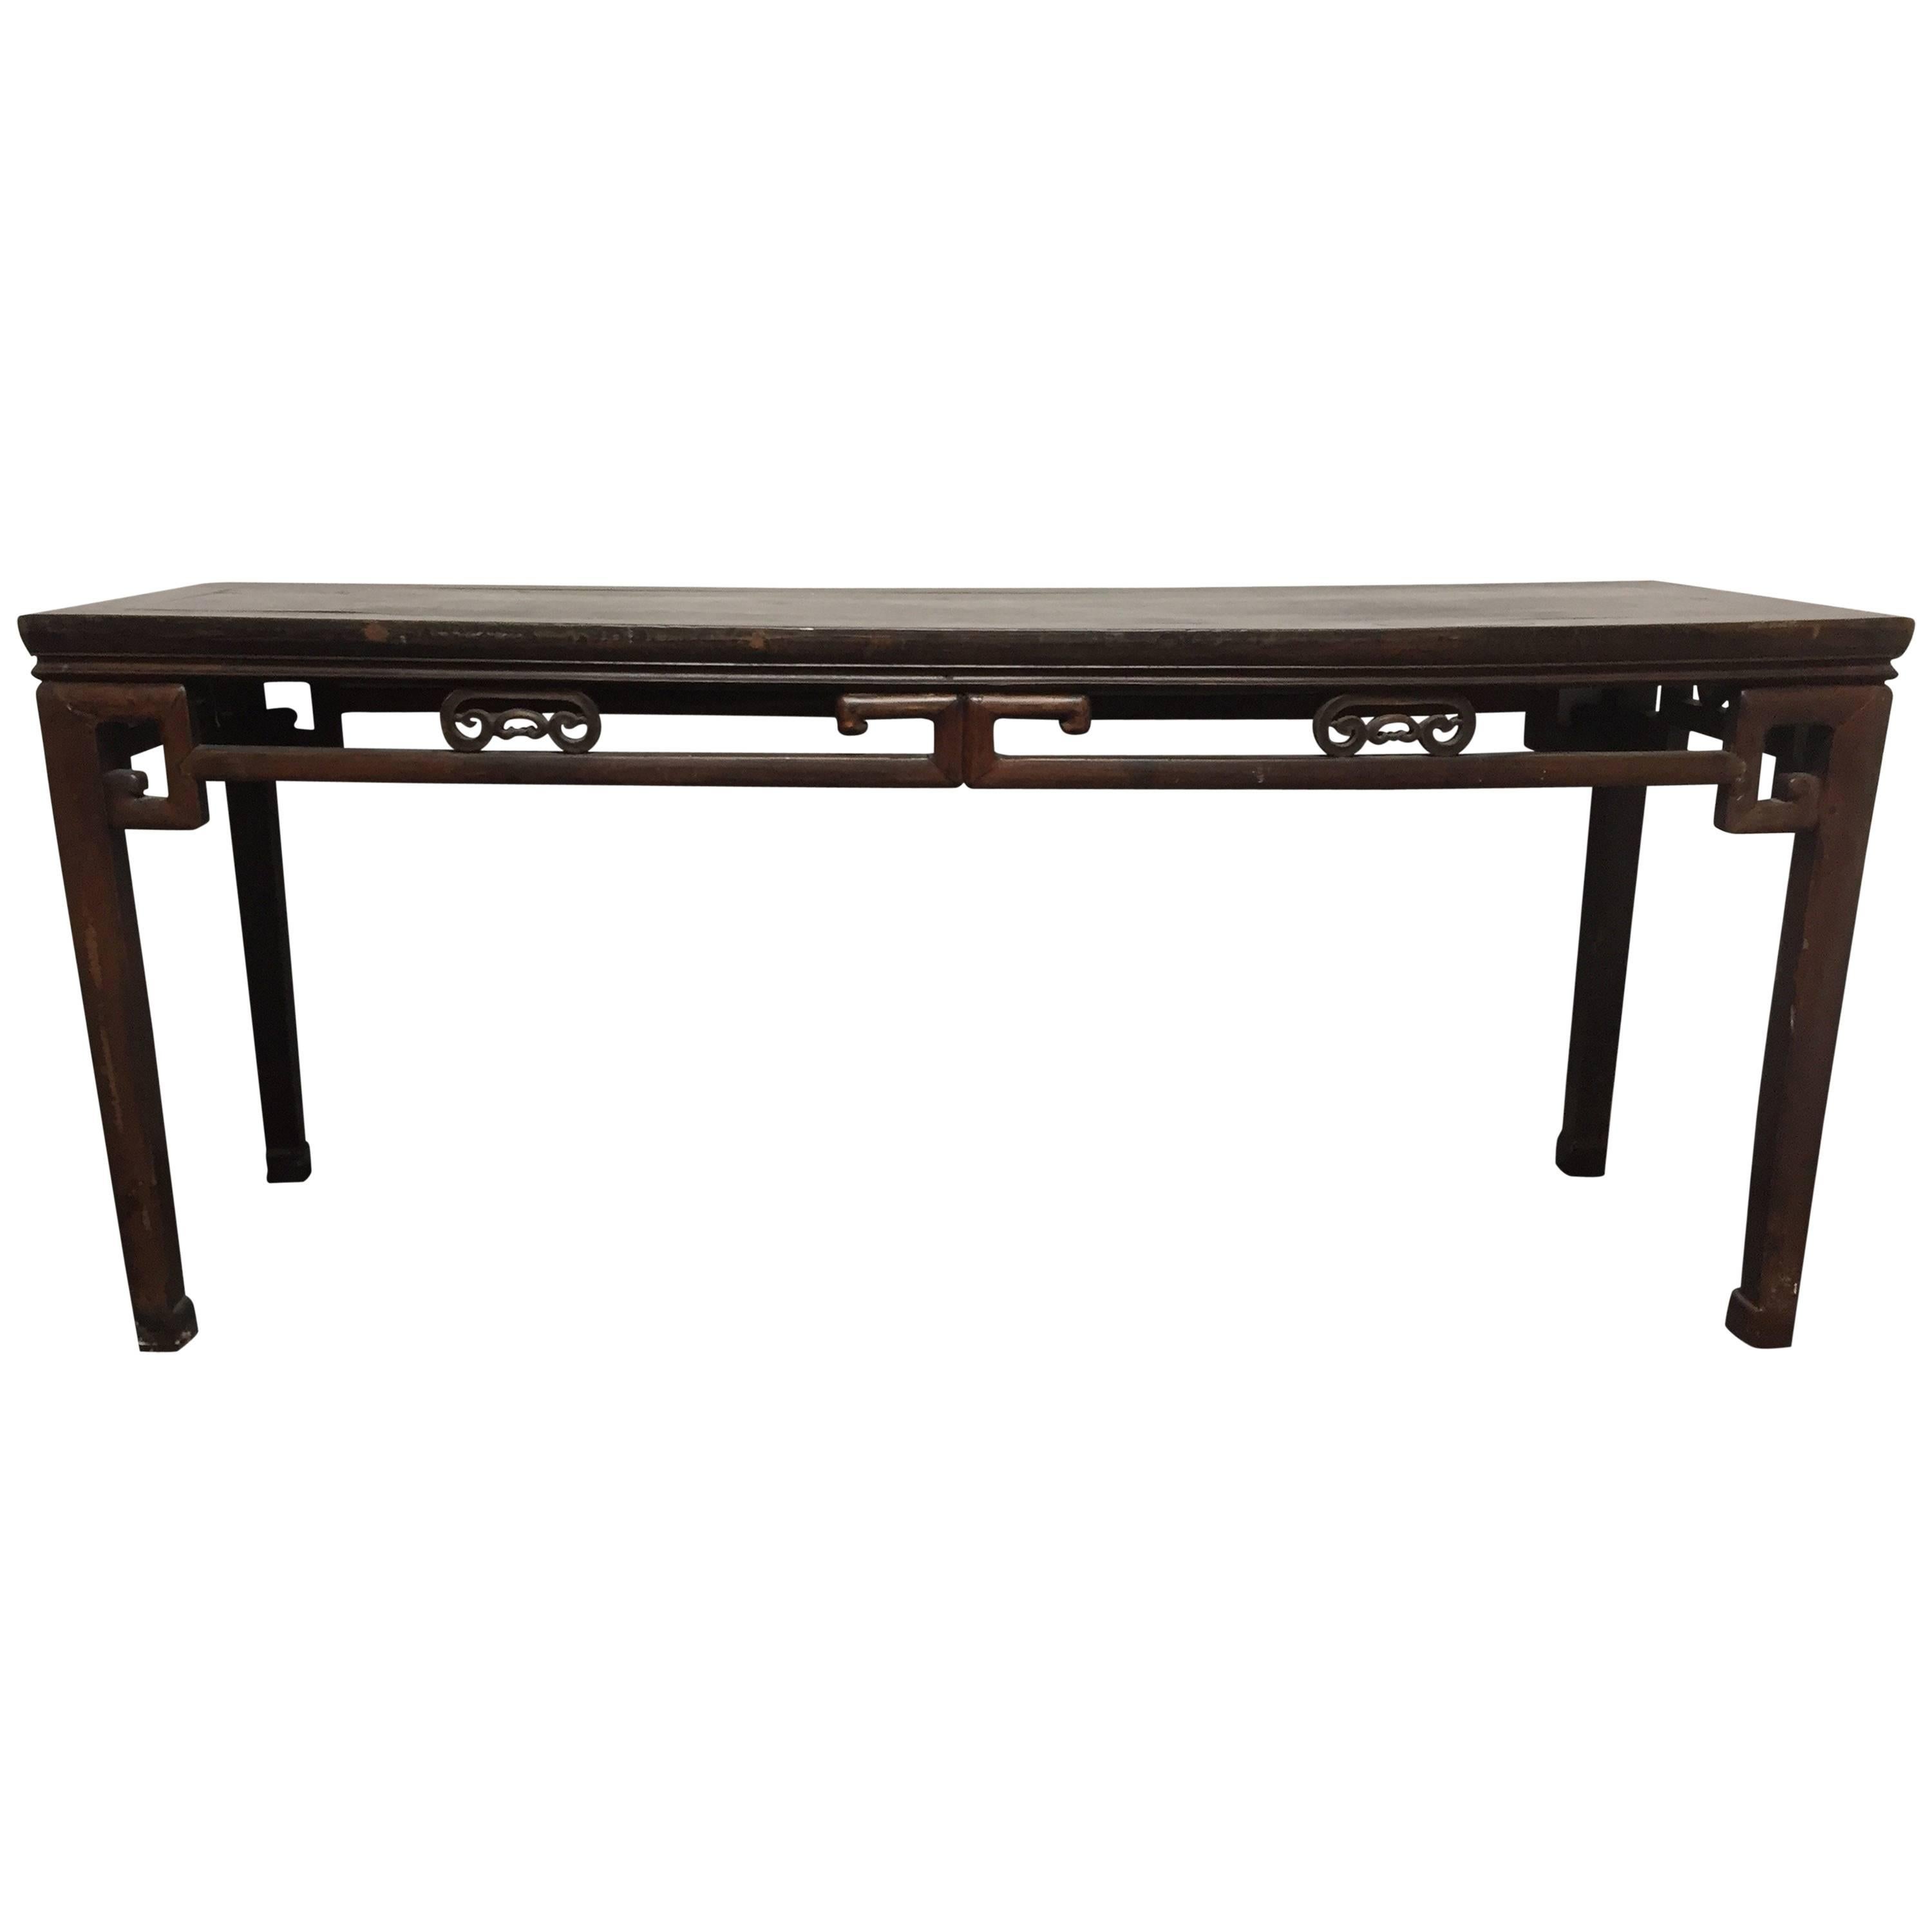 Late 19th Century Chinese Alter Table For Sale